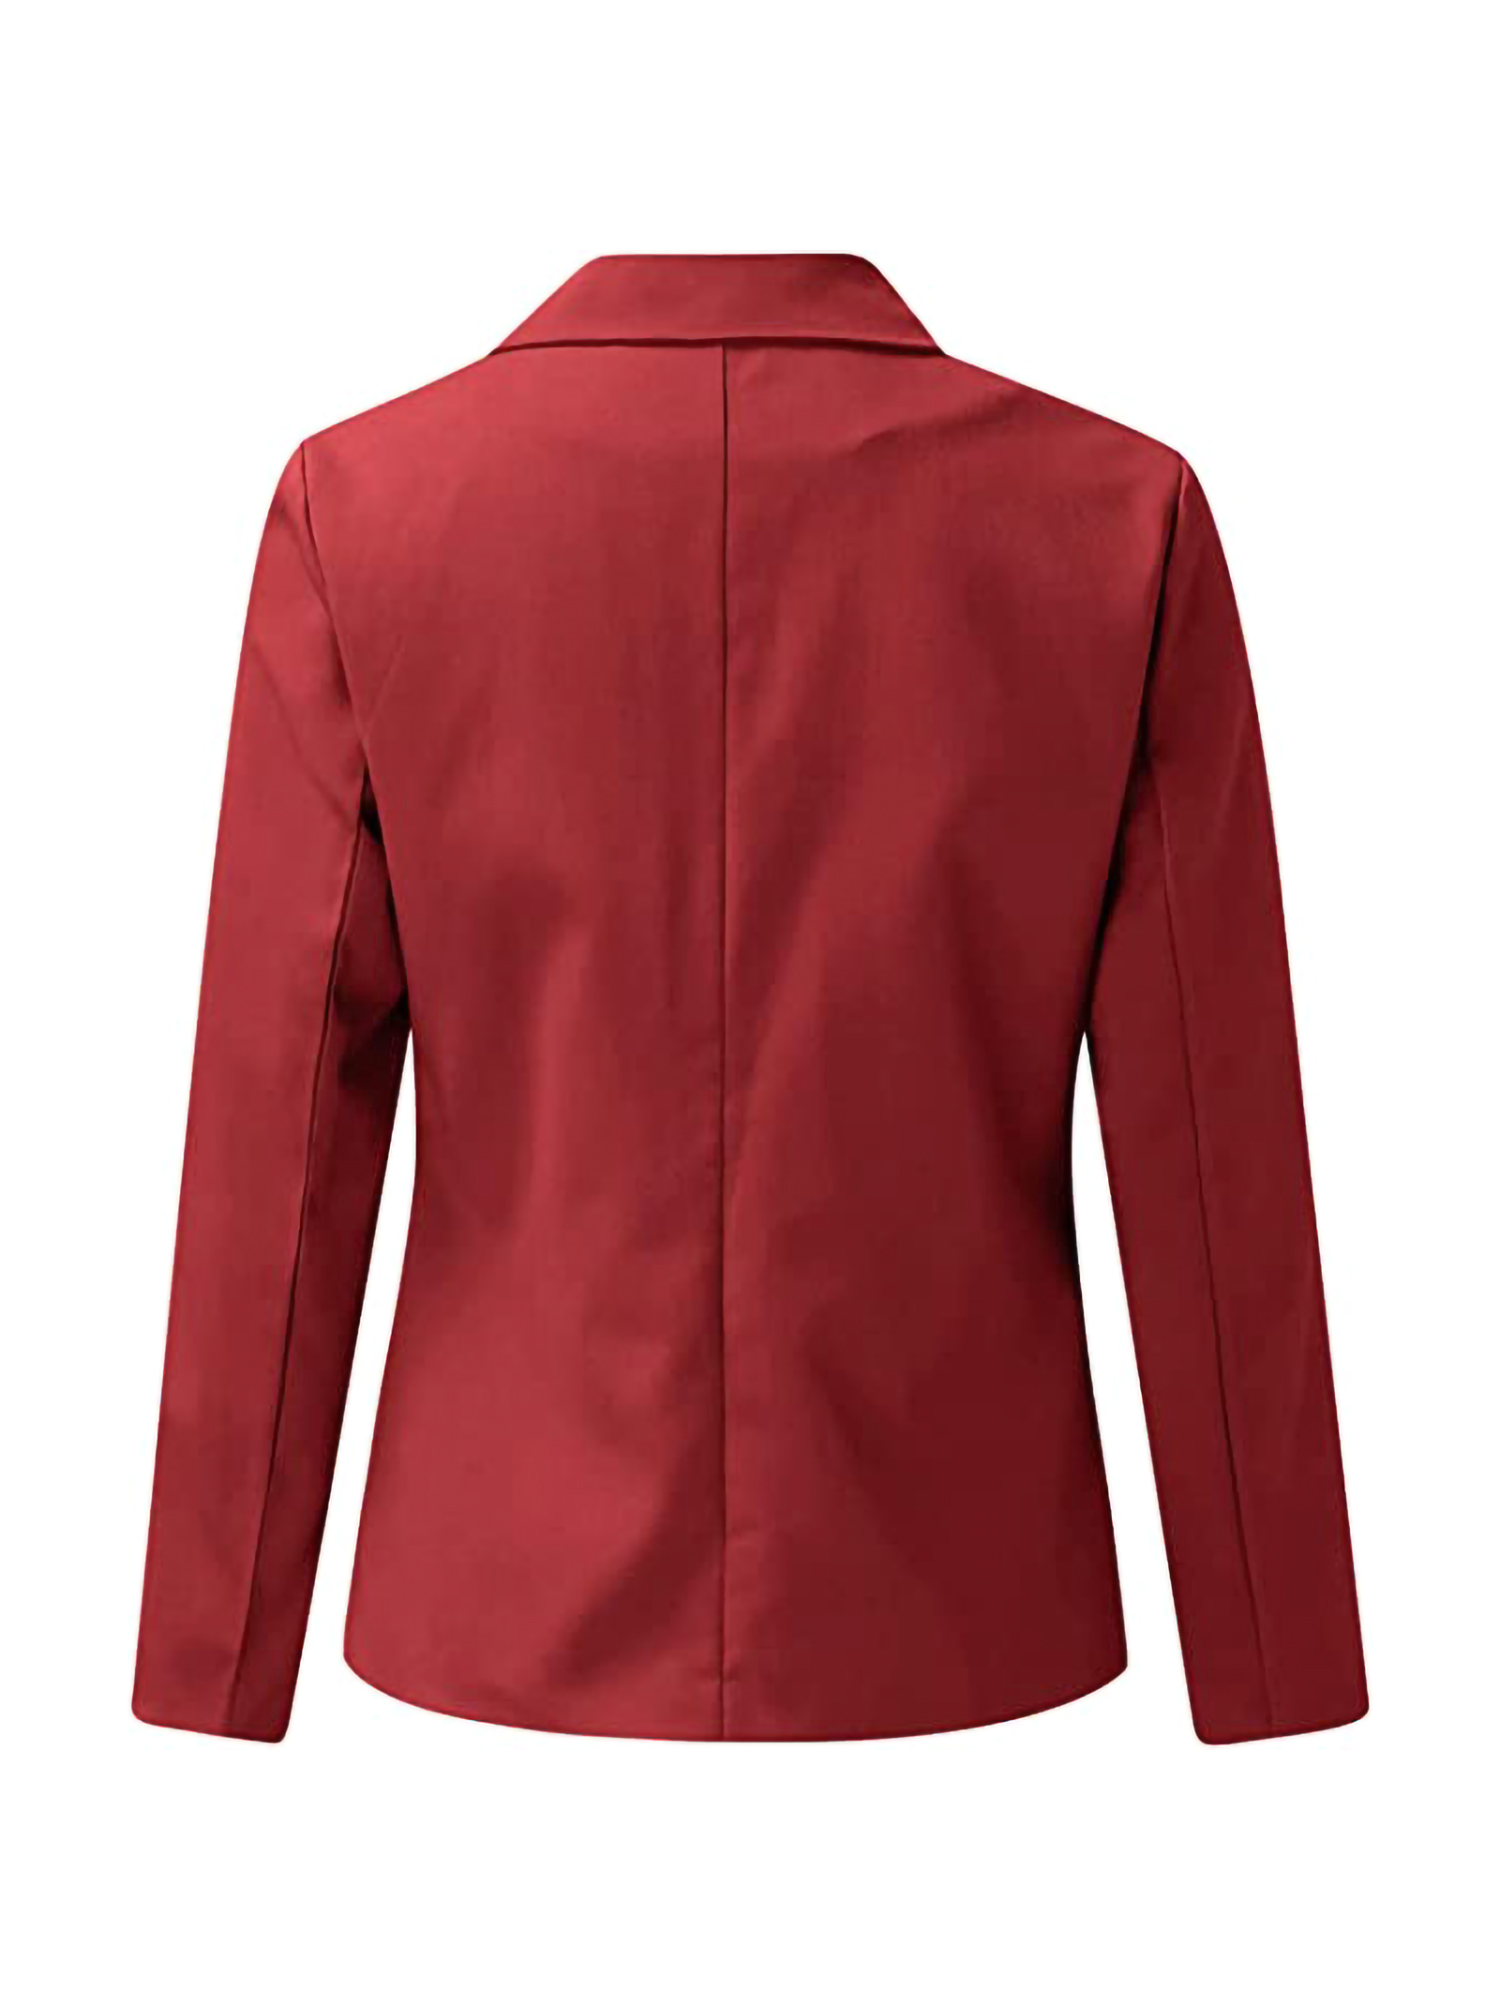 Niuer Ladies Elegant Open Front Business Jackets Women Plain Cardigan  Jacket Long Sleeve Work Solid Color Mid Length Blazers Red M 